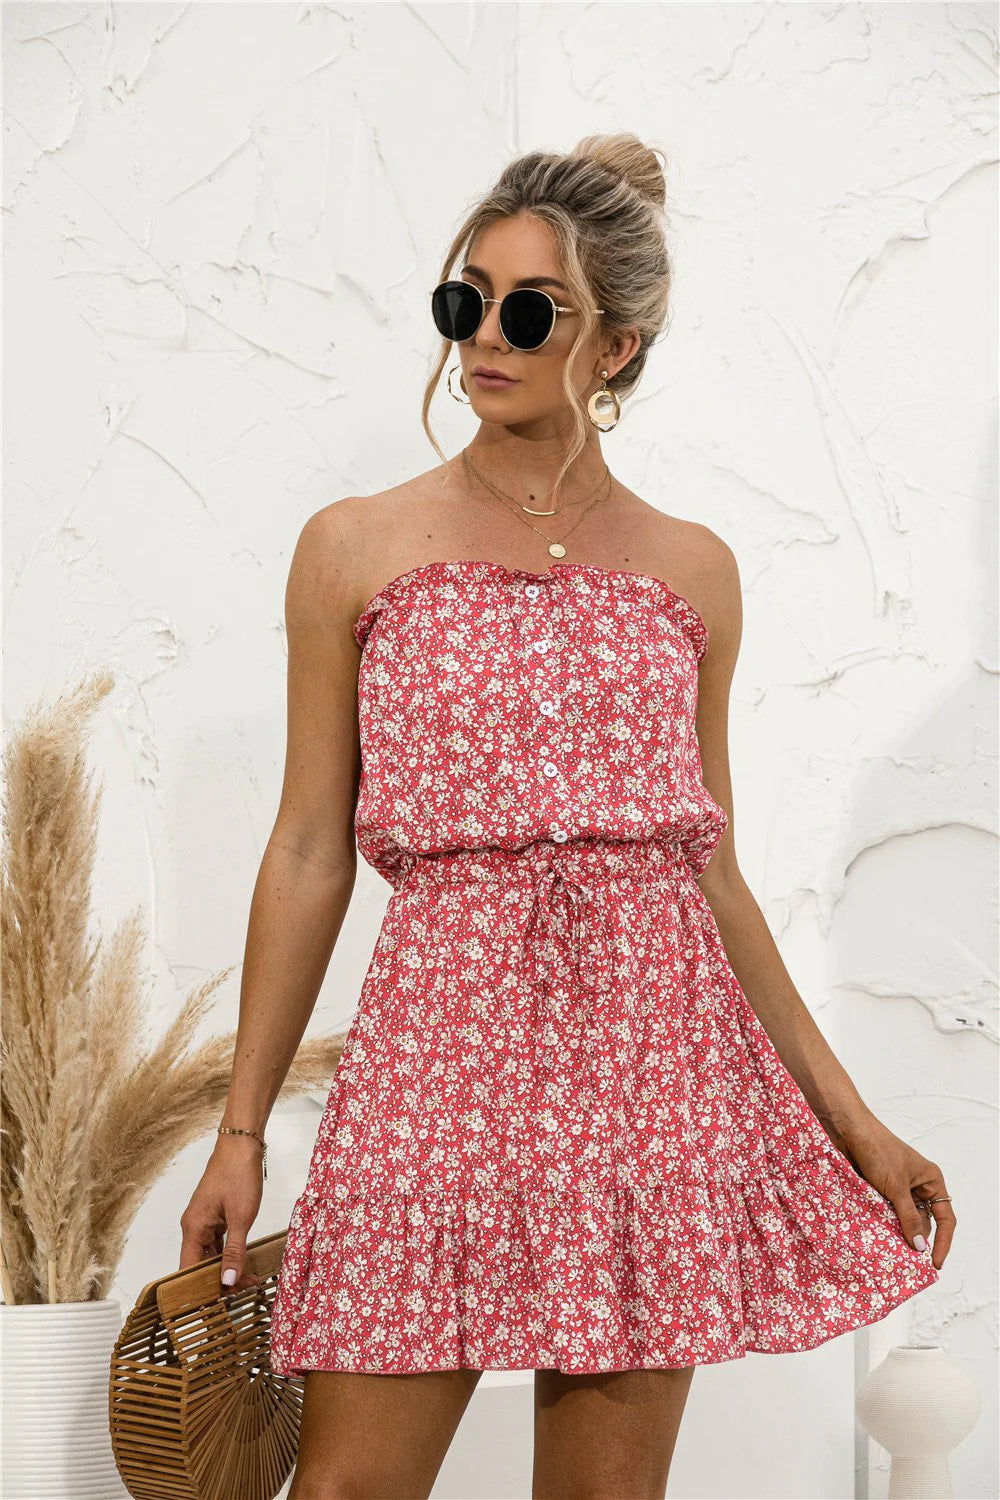 Stay Cool and Stylish this Summer with Bella Storia's Stunning Sundresses for Women!